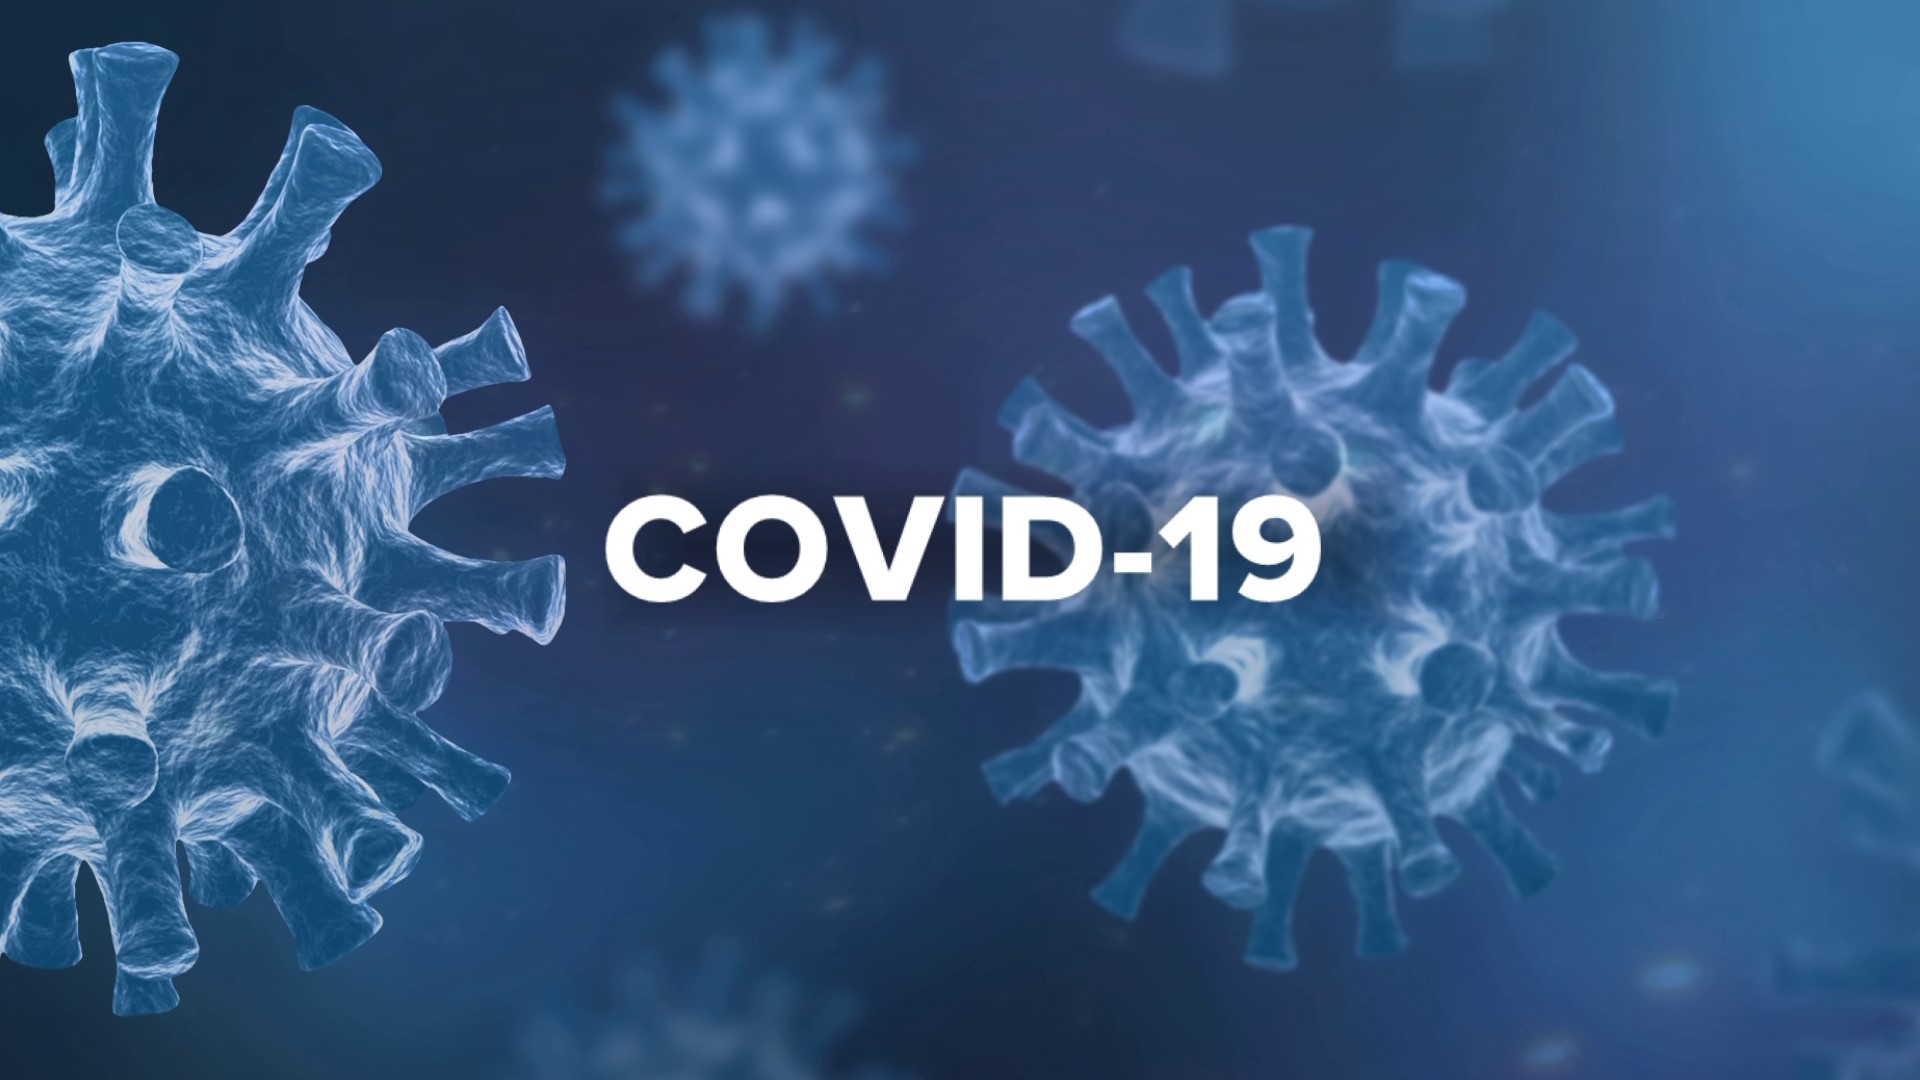 In a recent interview, President Joe Biden proclaimed, "The pandemic is over." Experts say it's a "new phase" of COVID-19.